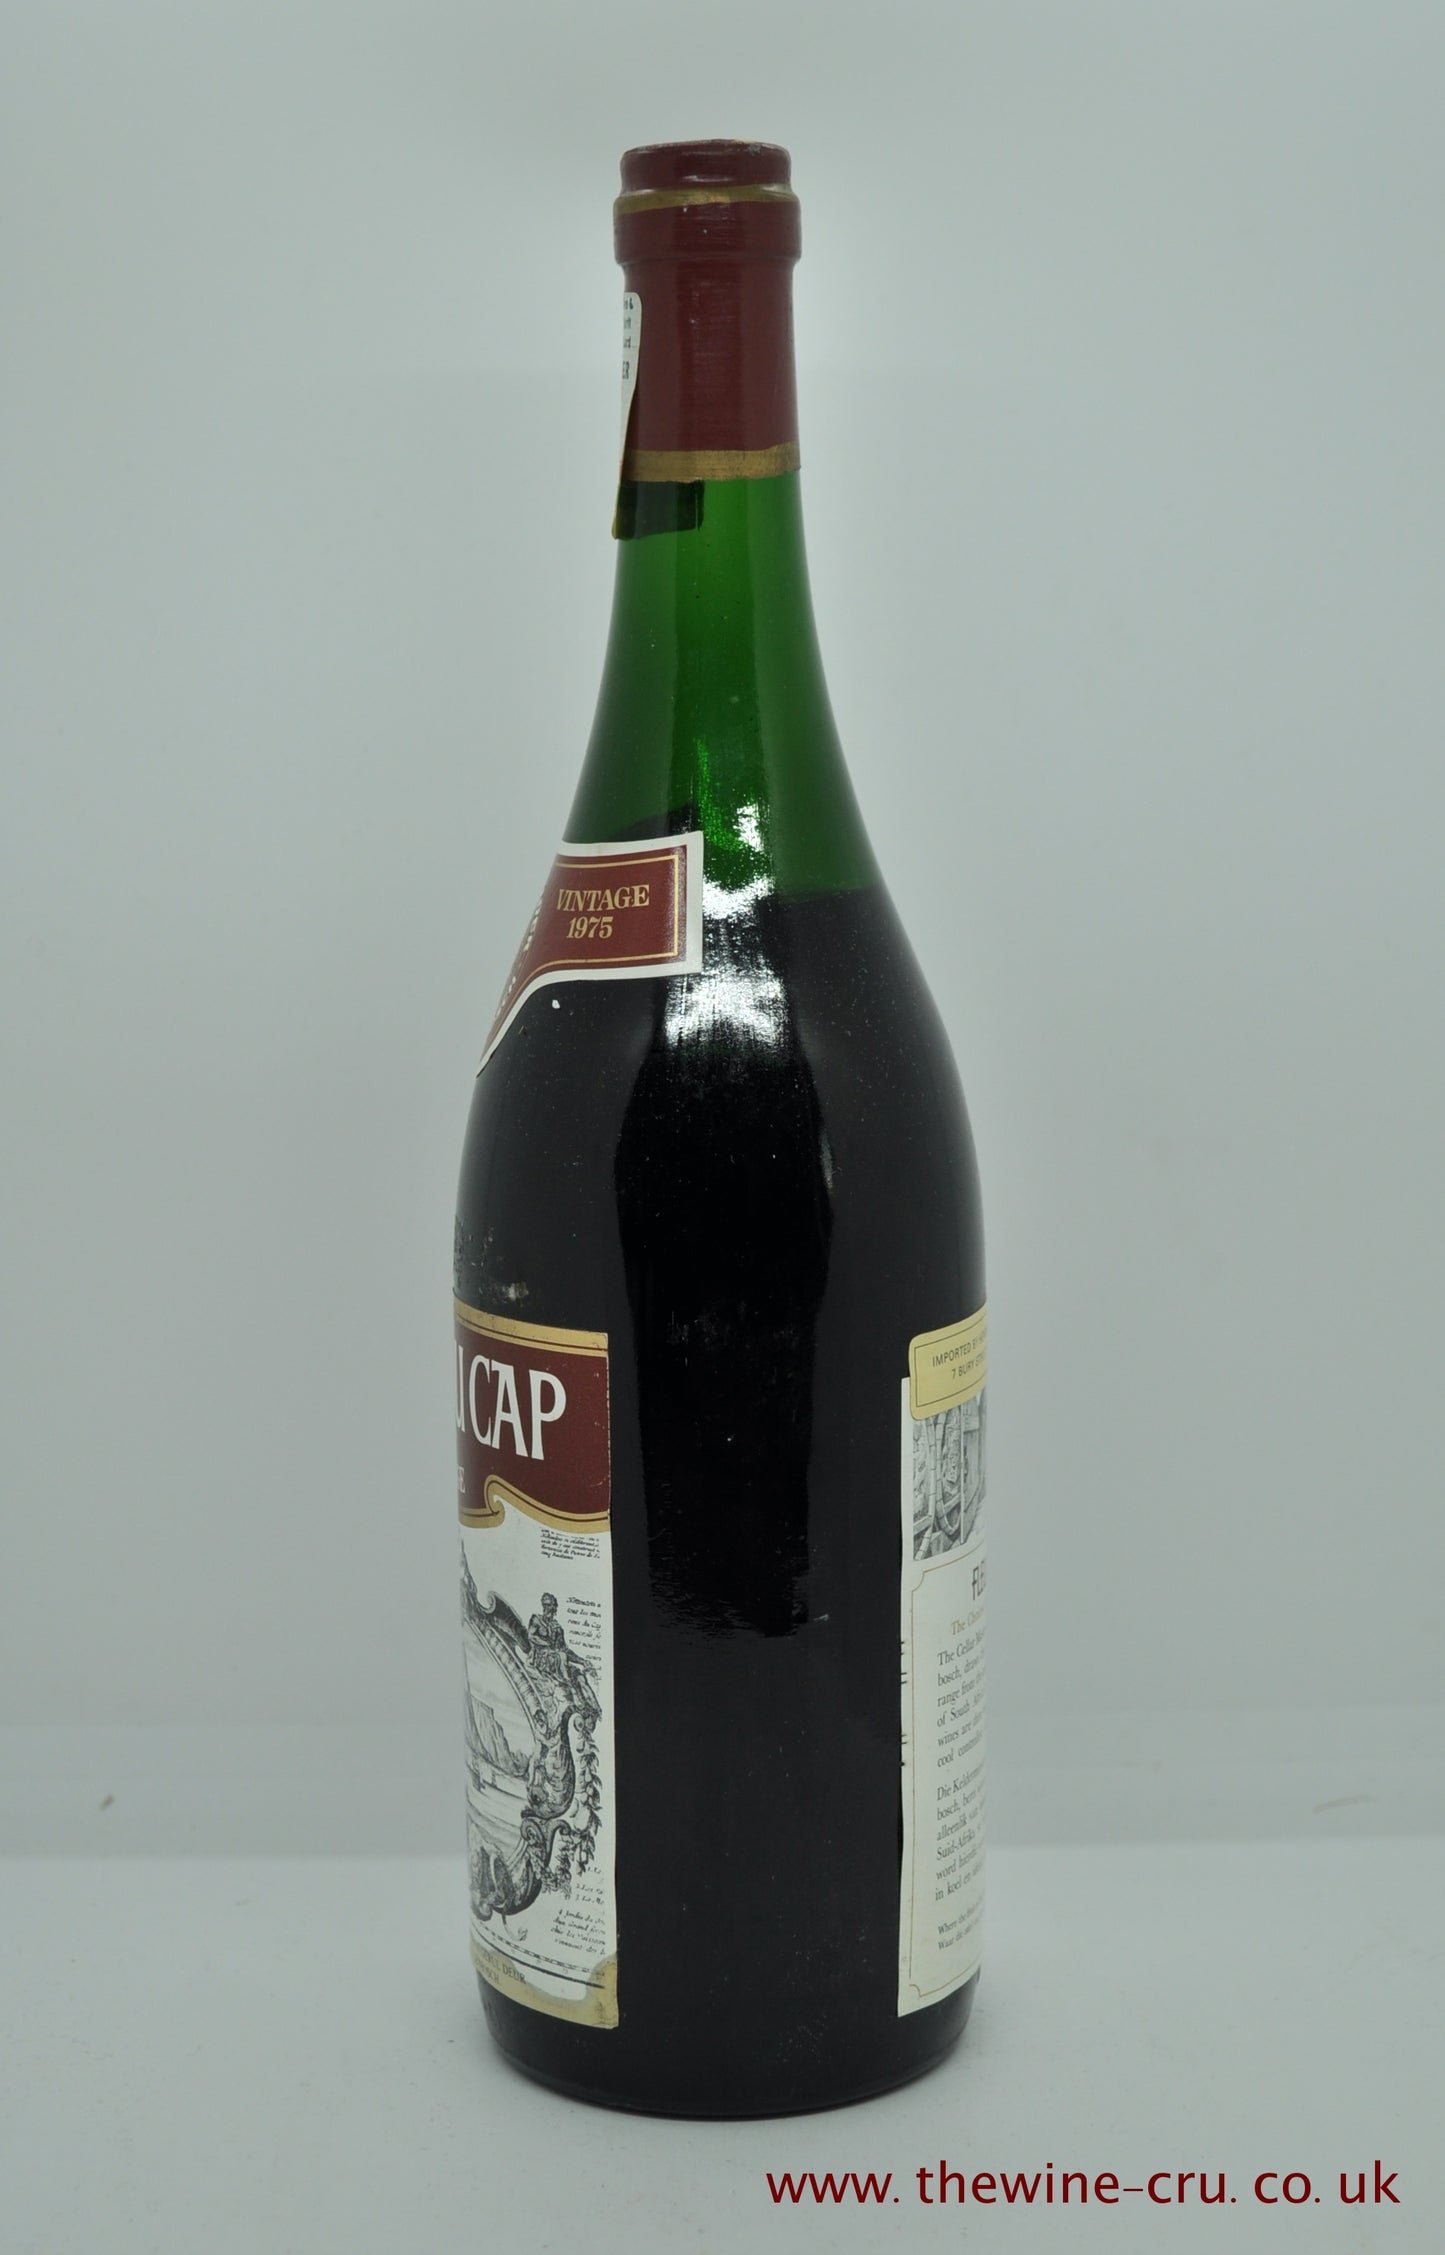 This is a side image of the bottle of 1975 Fleur Du Cap to show the level as described in the other photo text.